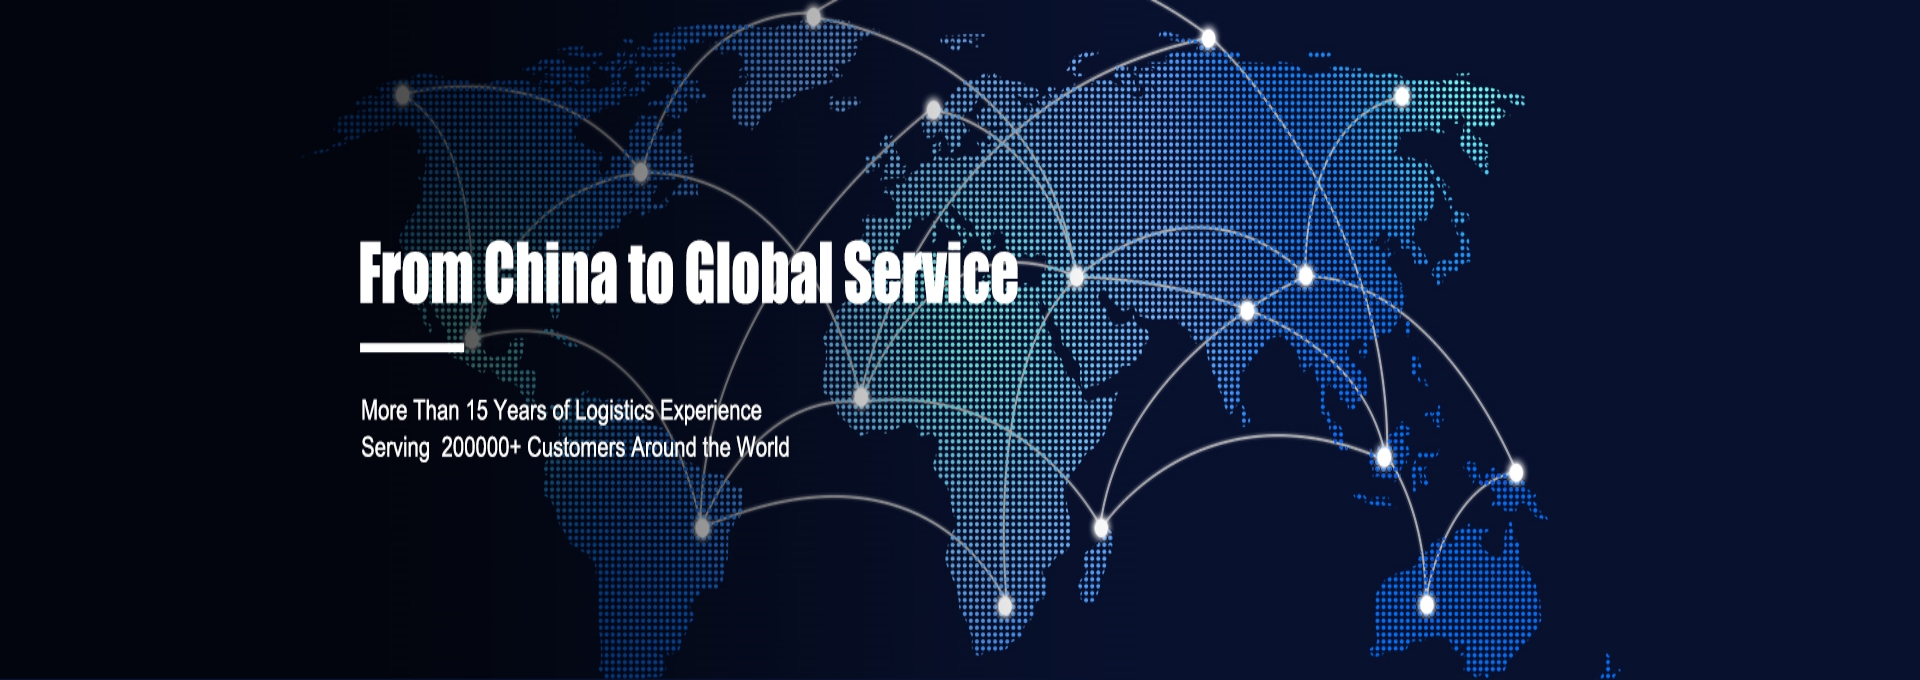 International Courier Services Witness Unprecedented Growth in Global Trade